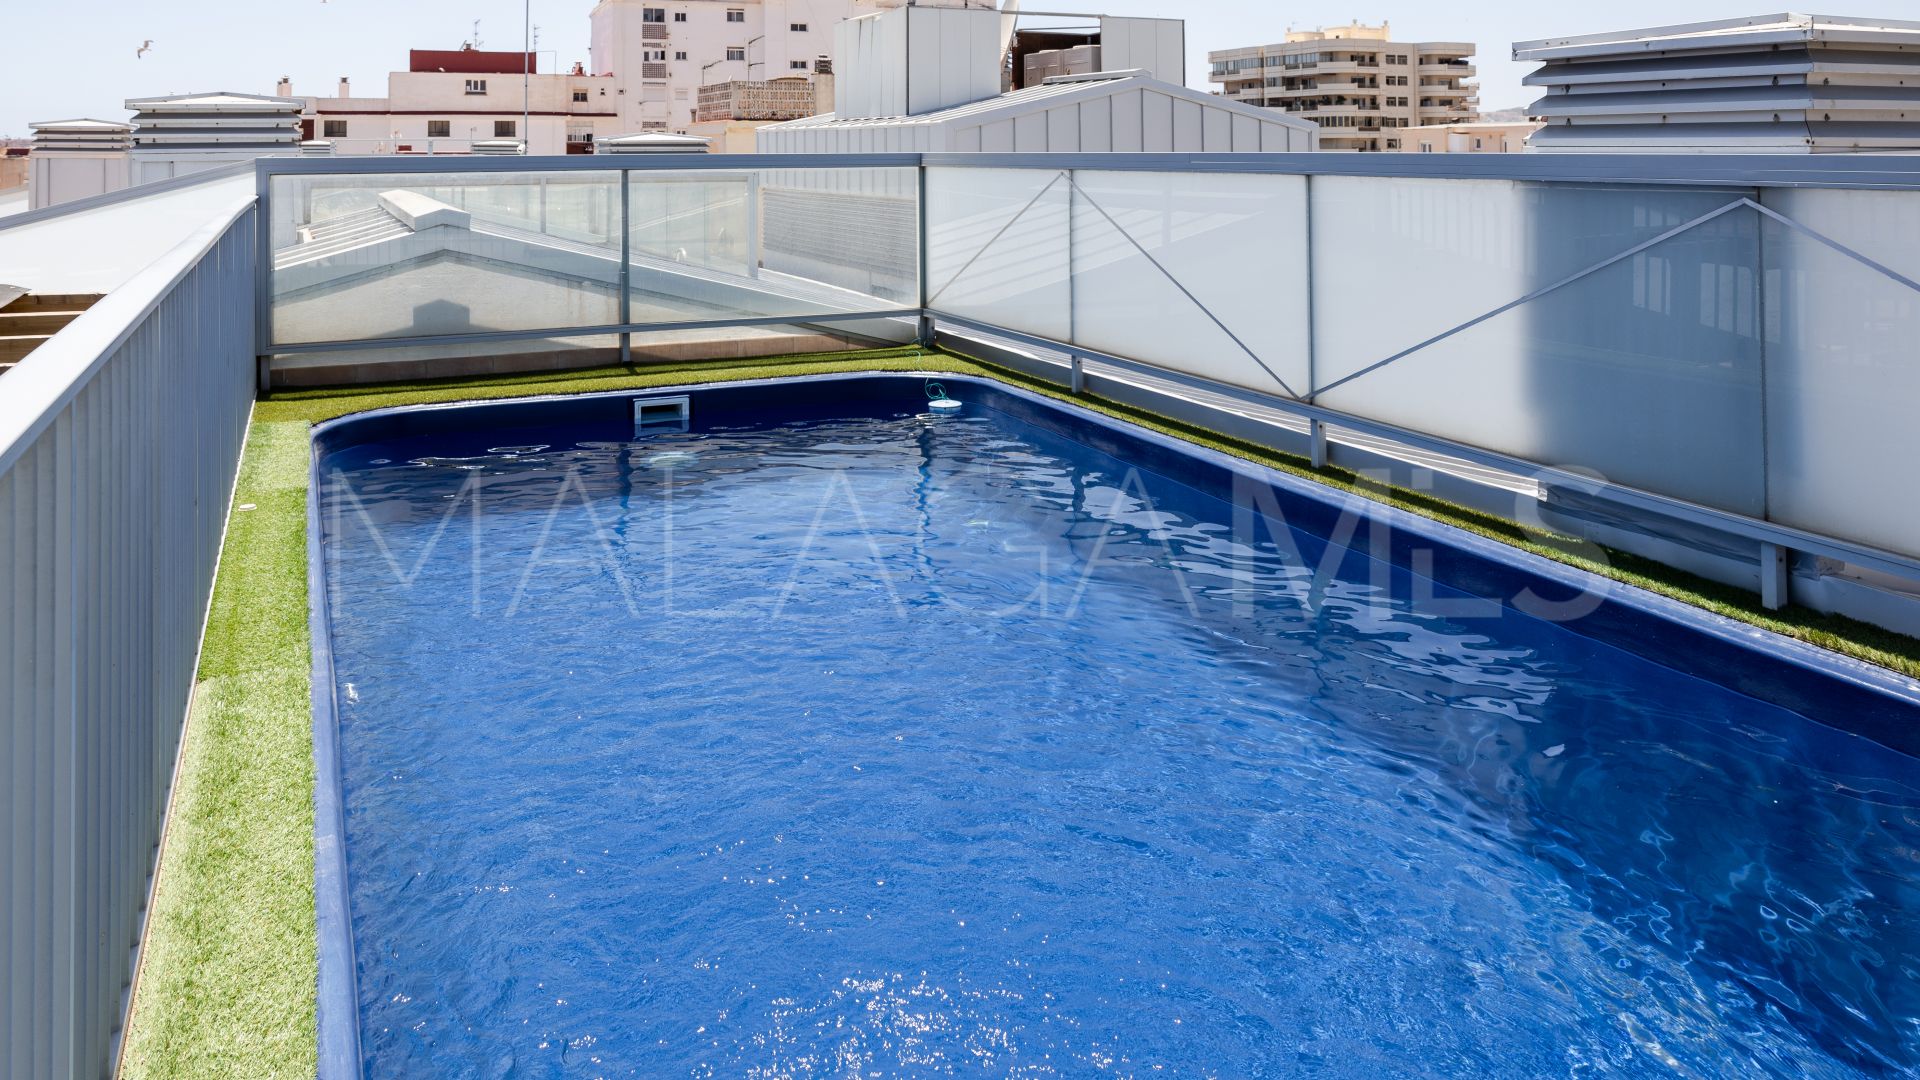 For sale duplex penthouse in Fuengirola Centro with 4 bedrooms